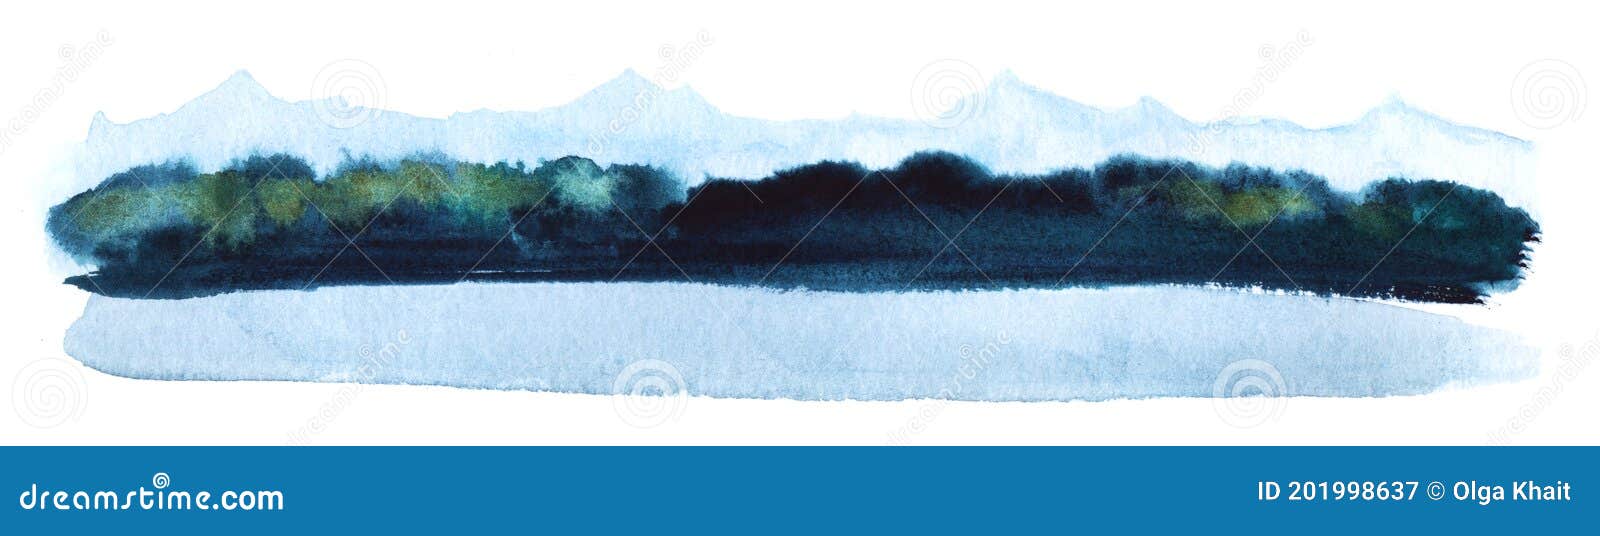 abstract watercolor background. stripe of landscape of vague silhouettes of blue mountains, blurry dark forest and lake on white